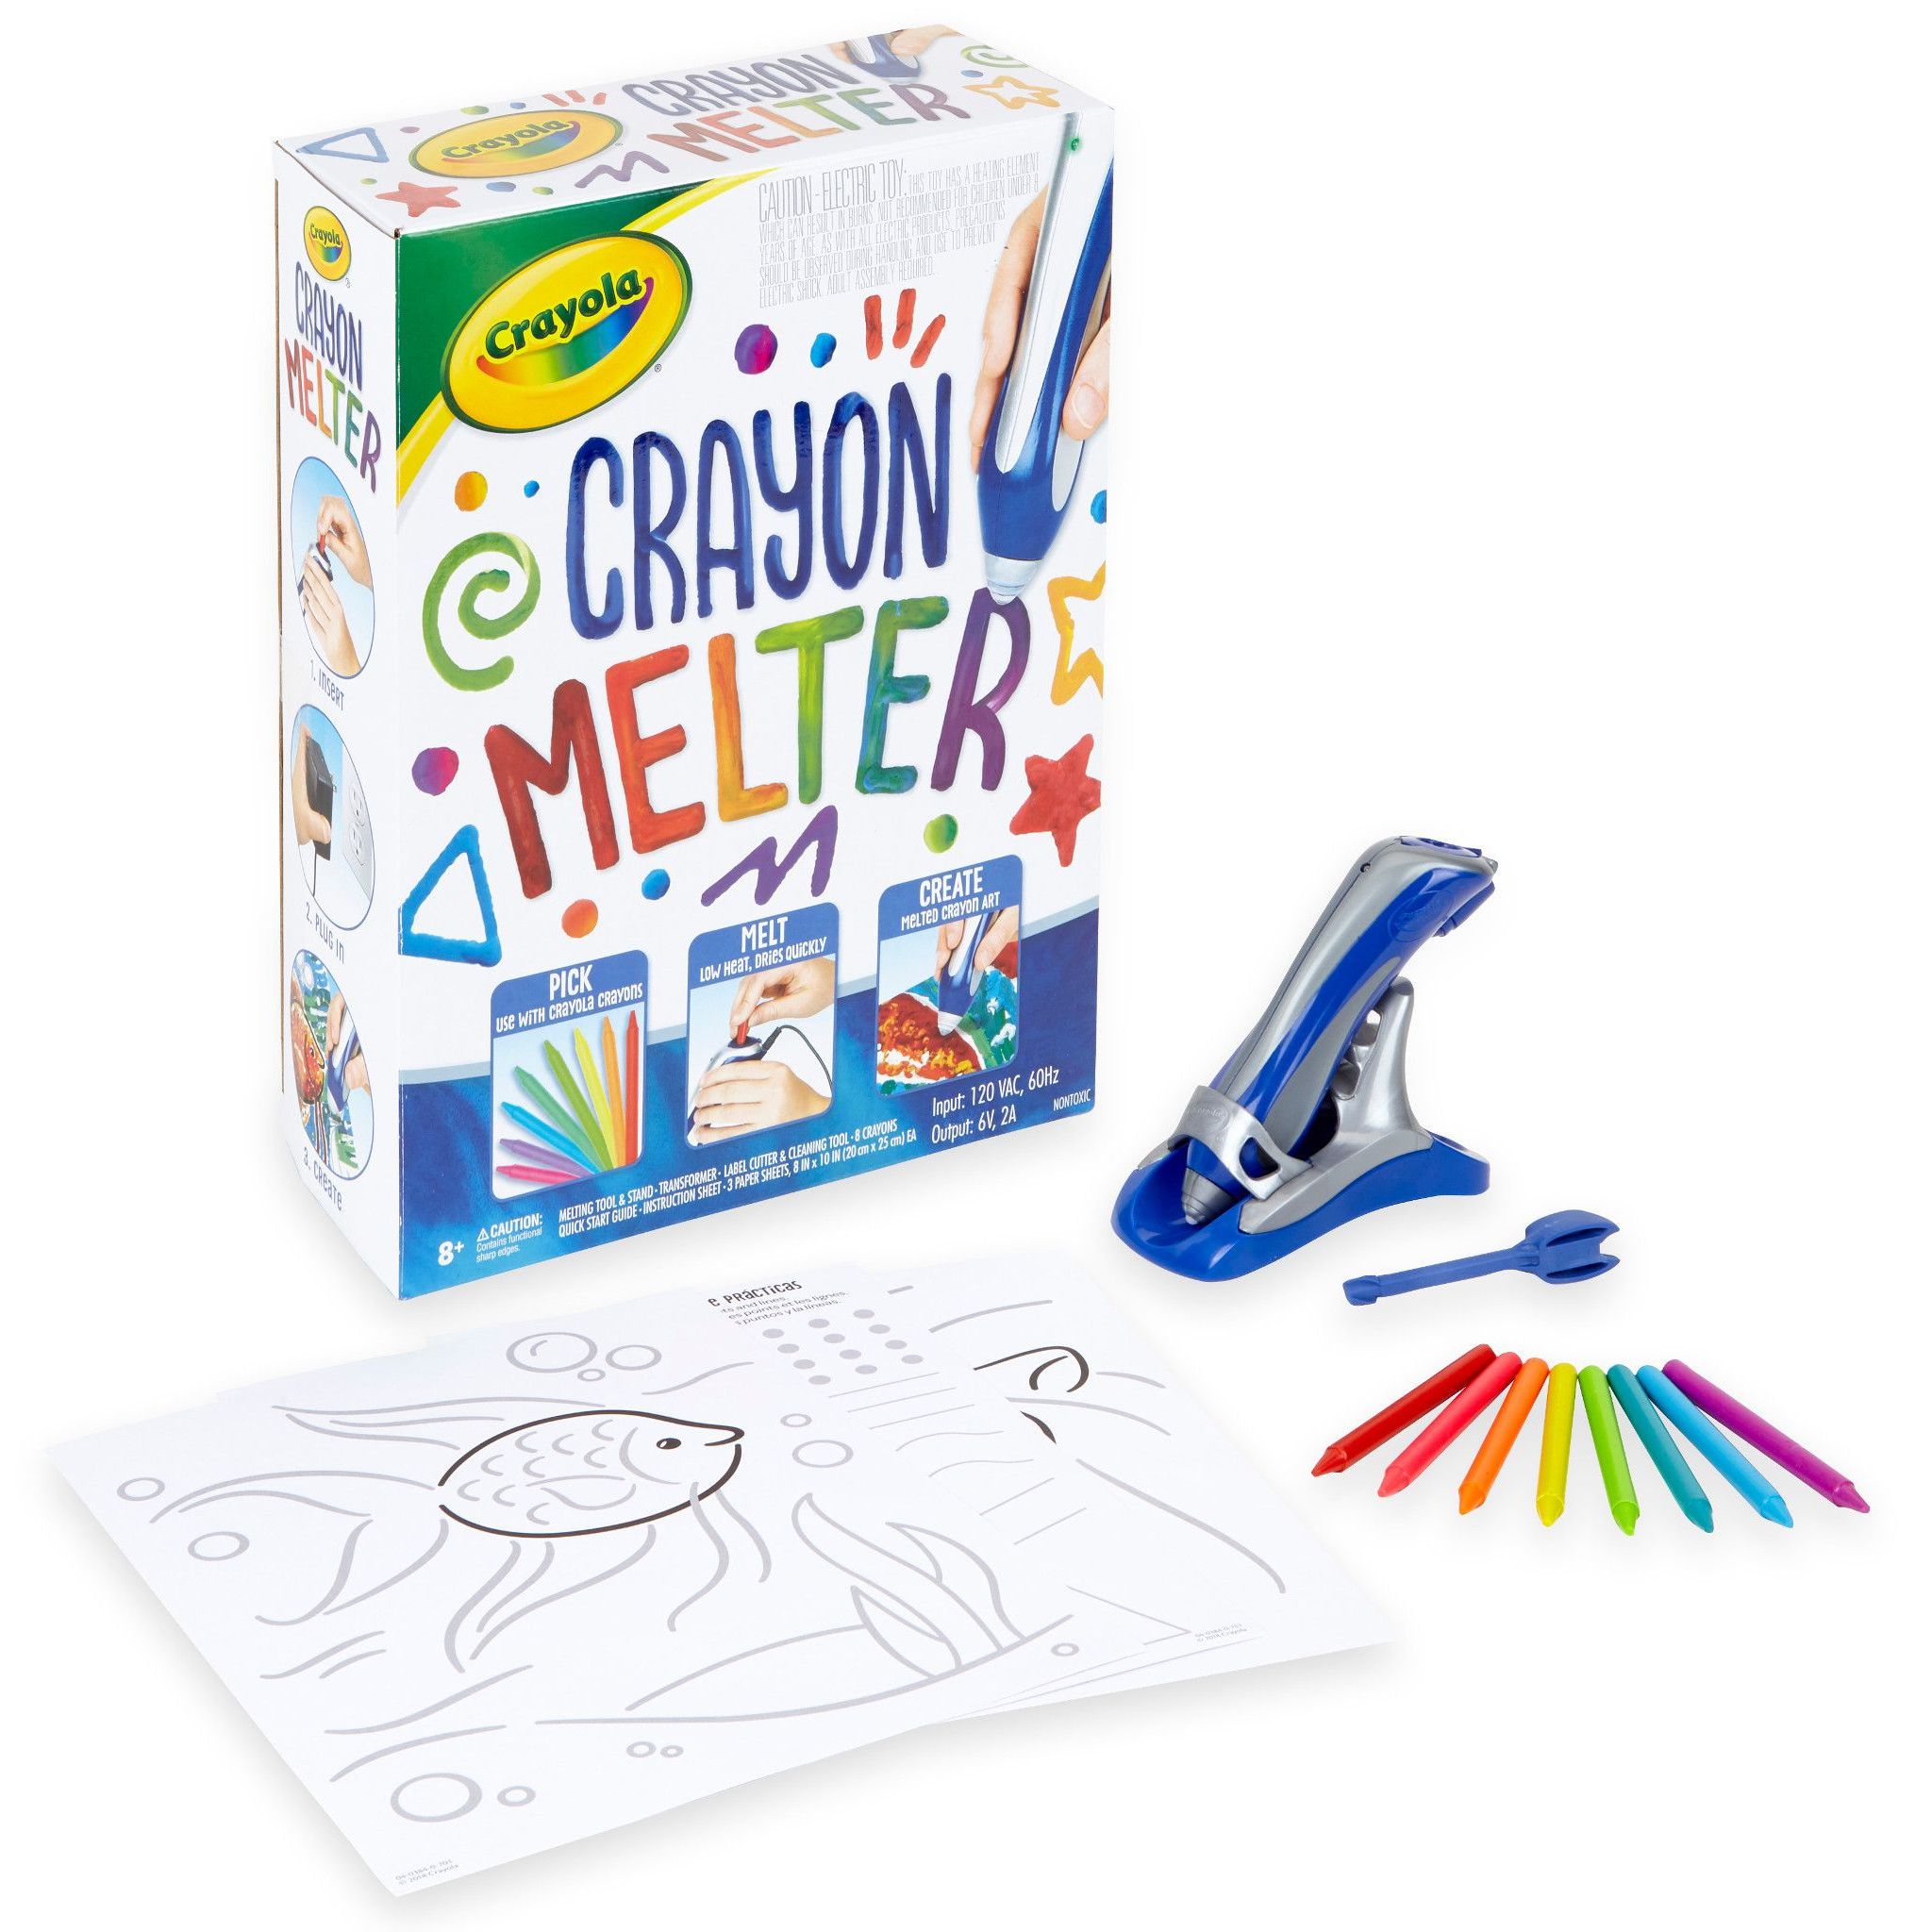 Crayola Crayon Melter Kit with Crayons, School Supplies, Gifts for Kids, Unisex Child - image 1 of 10